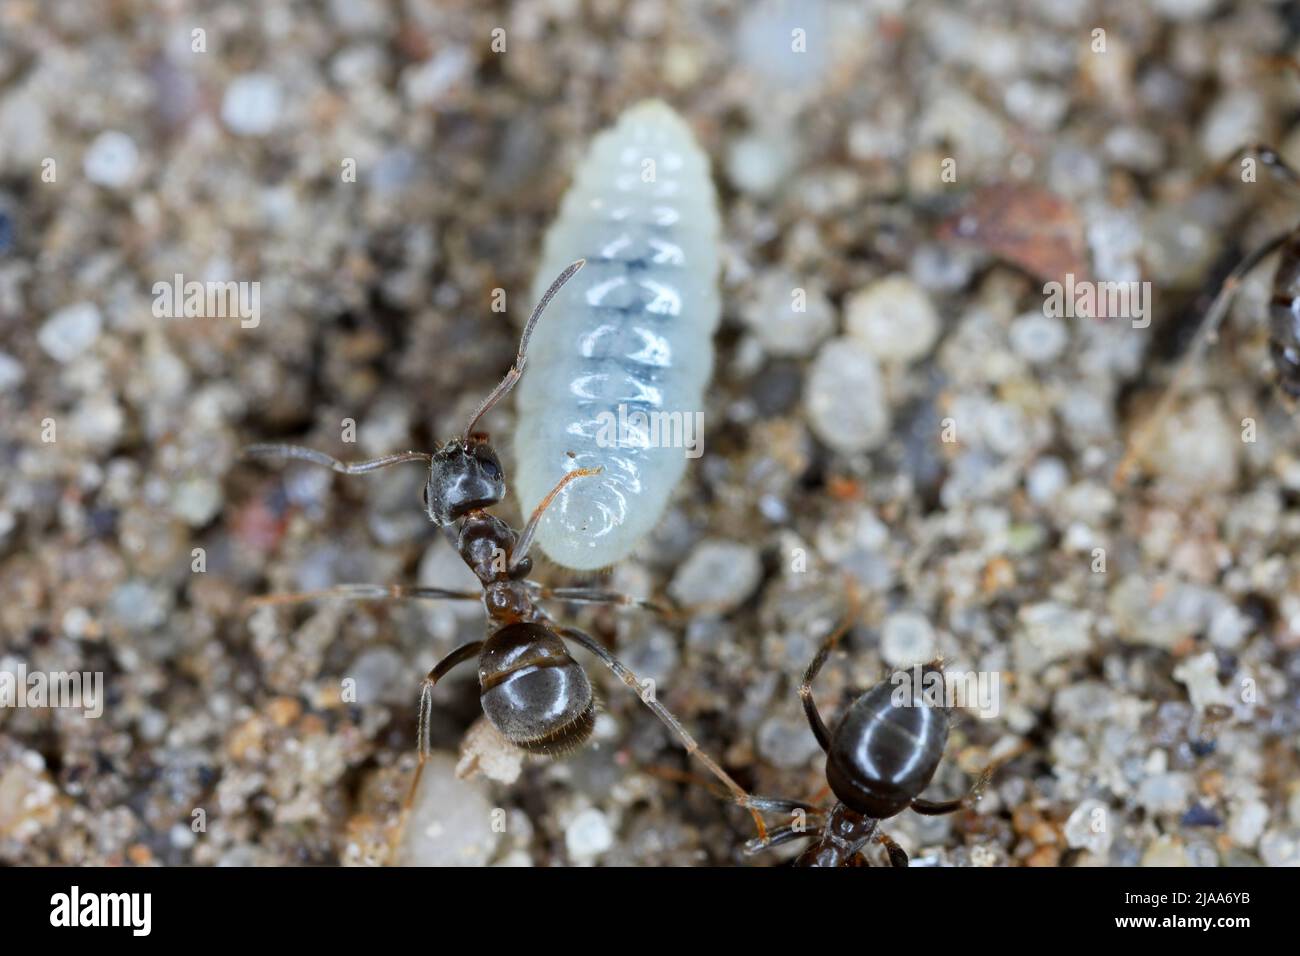 Ants rescuing larvae after uncovering an anthill in the garden. Stock Photo